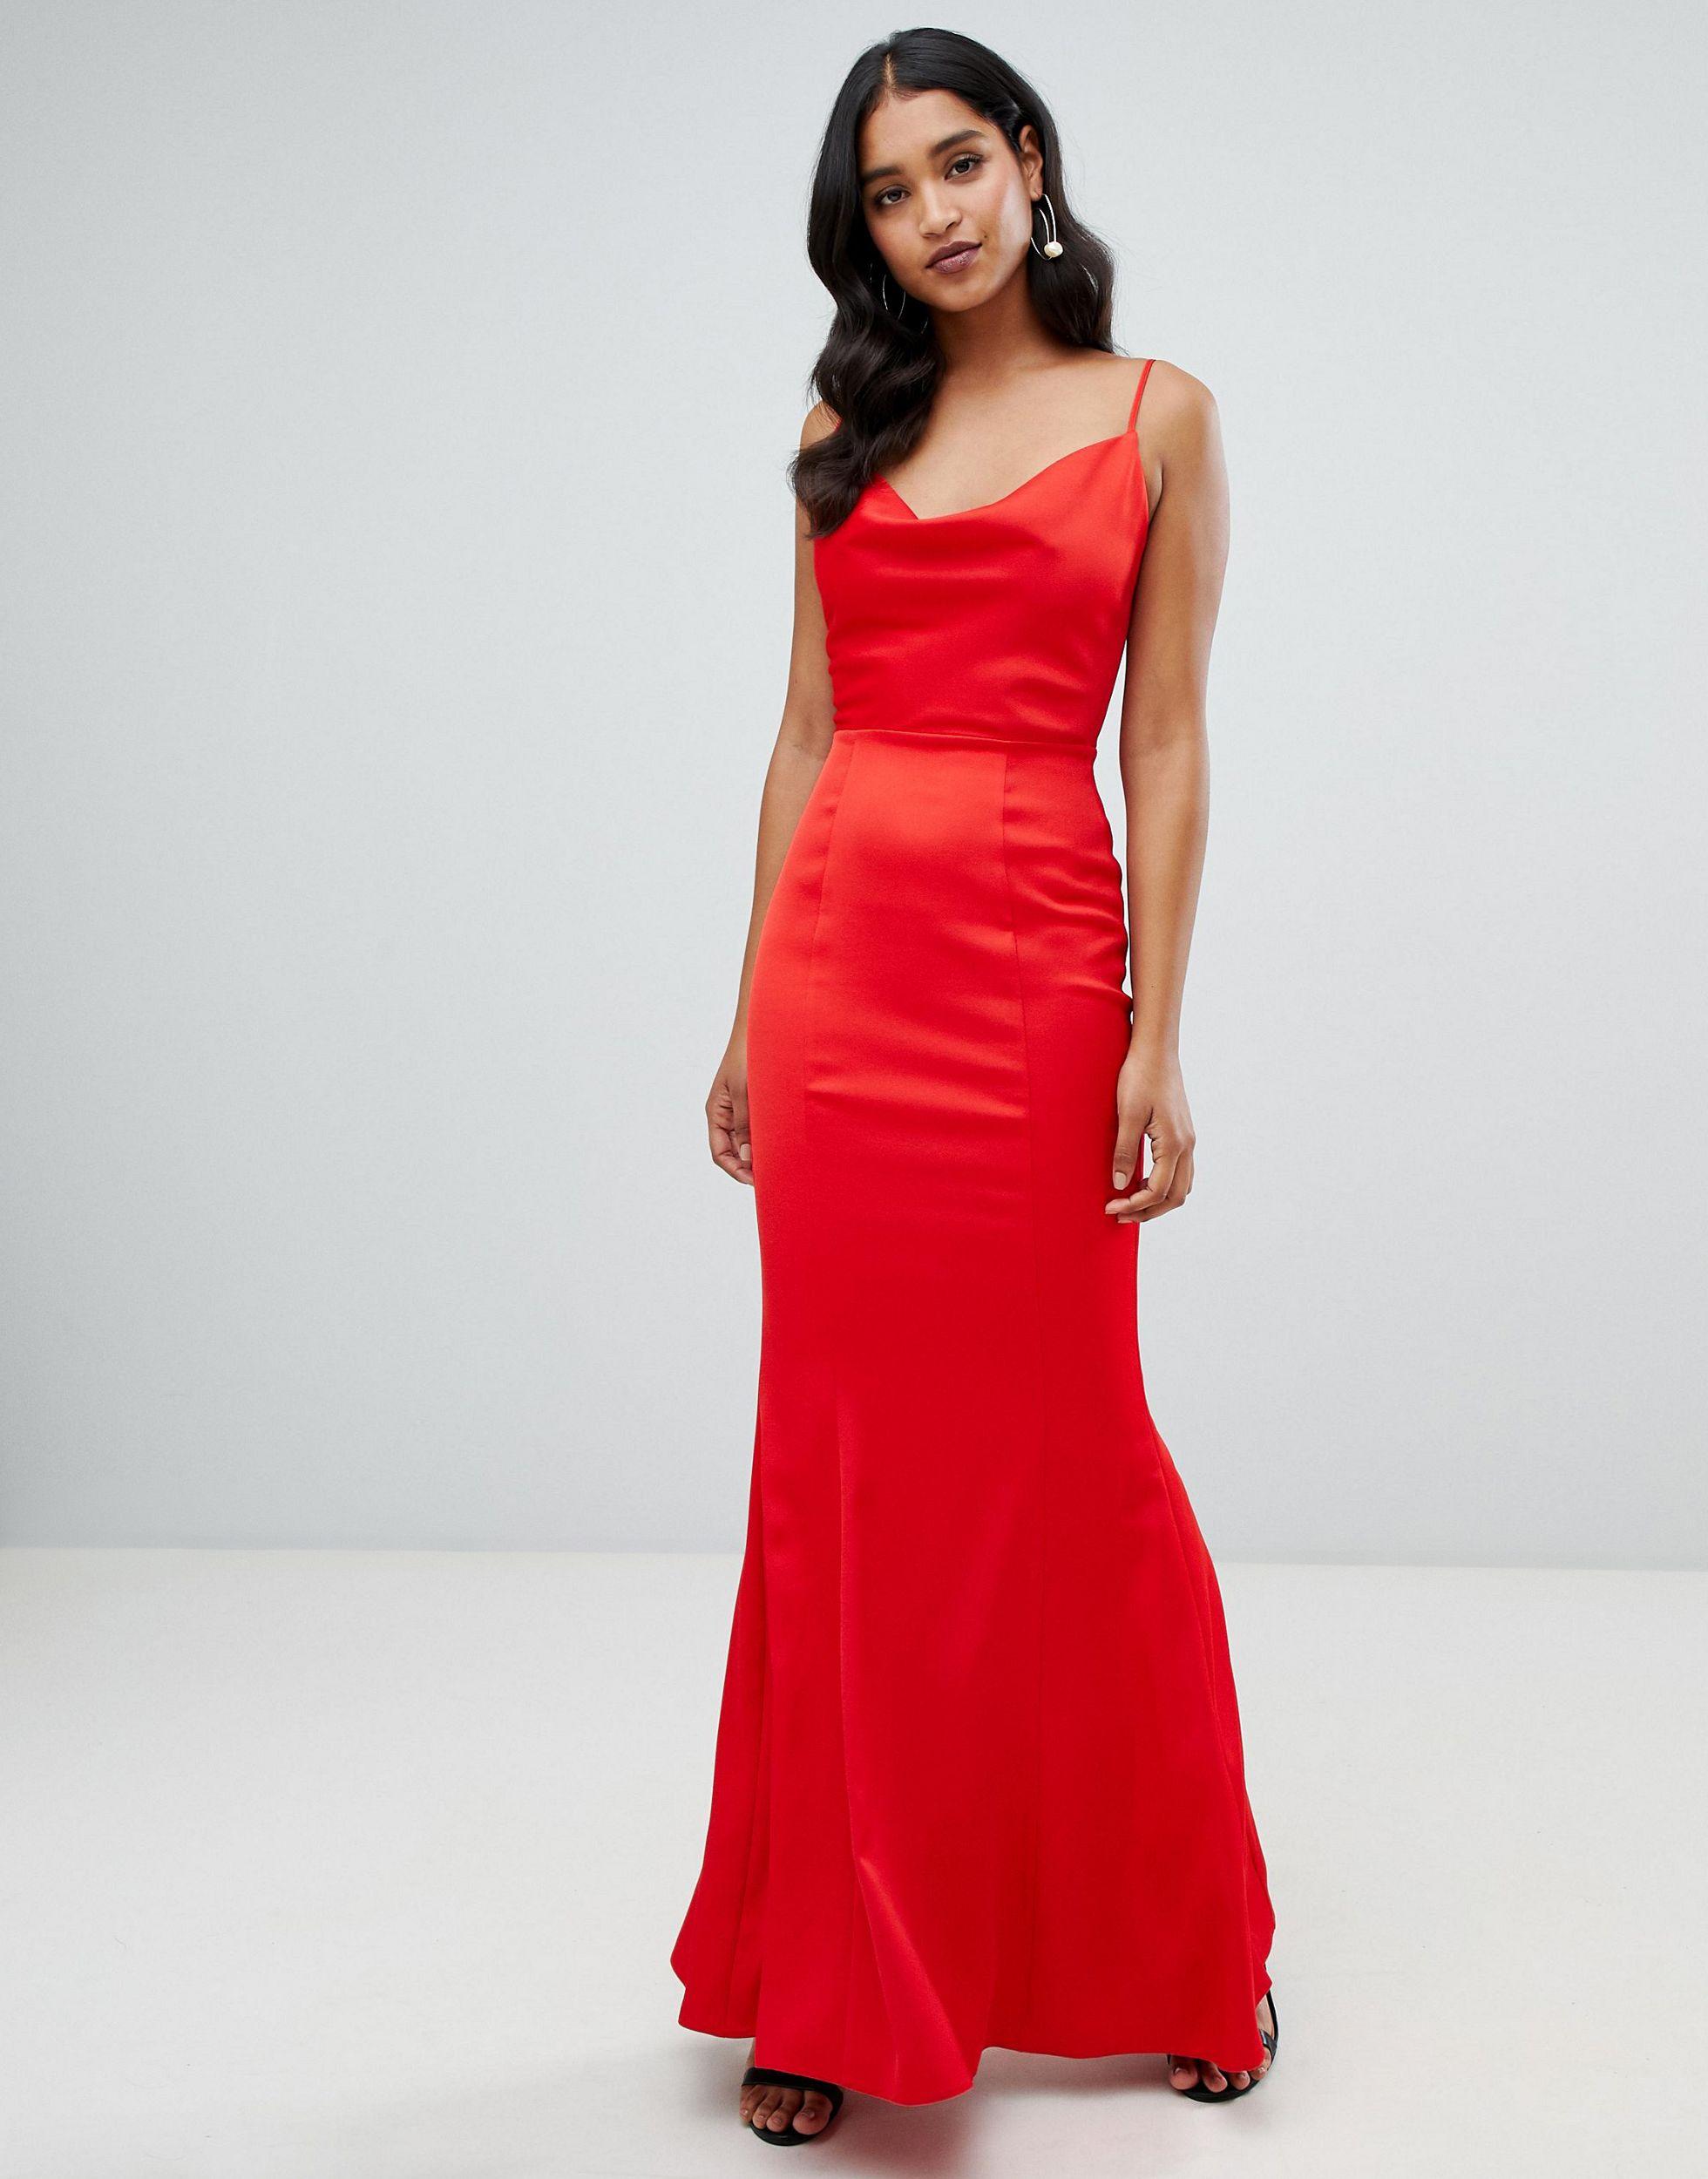 Lipsy Synthetic Cowl Neck Maxi Dress in Red - Lyst